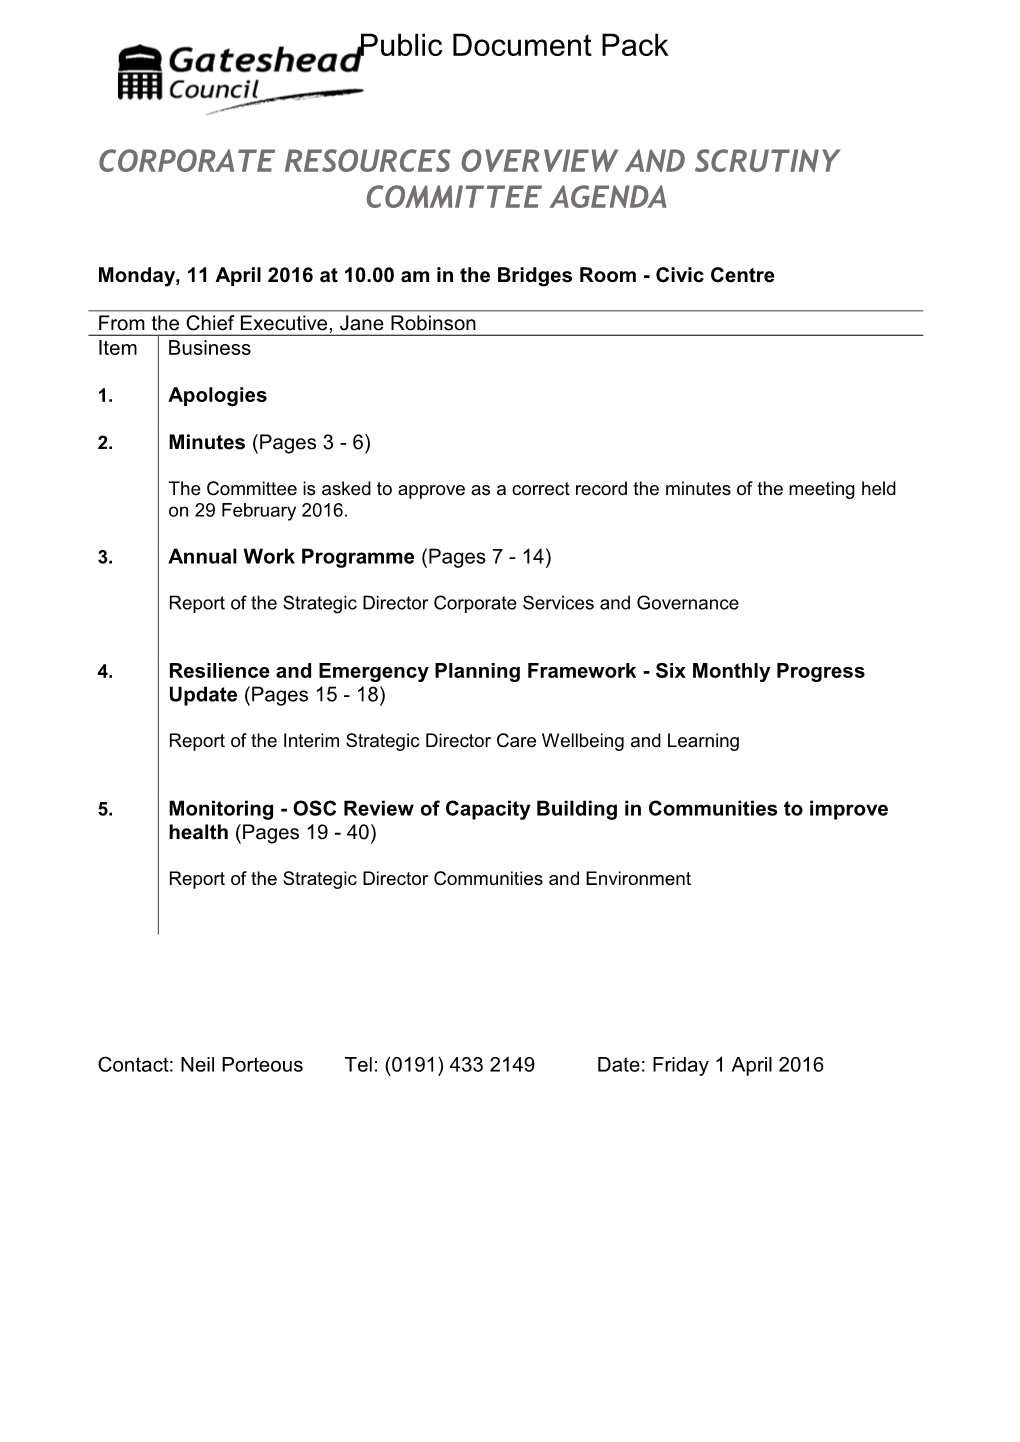 (Public Pack)Agenda Document for Corporate Resources Overview